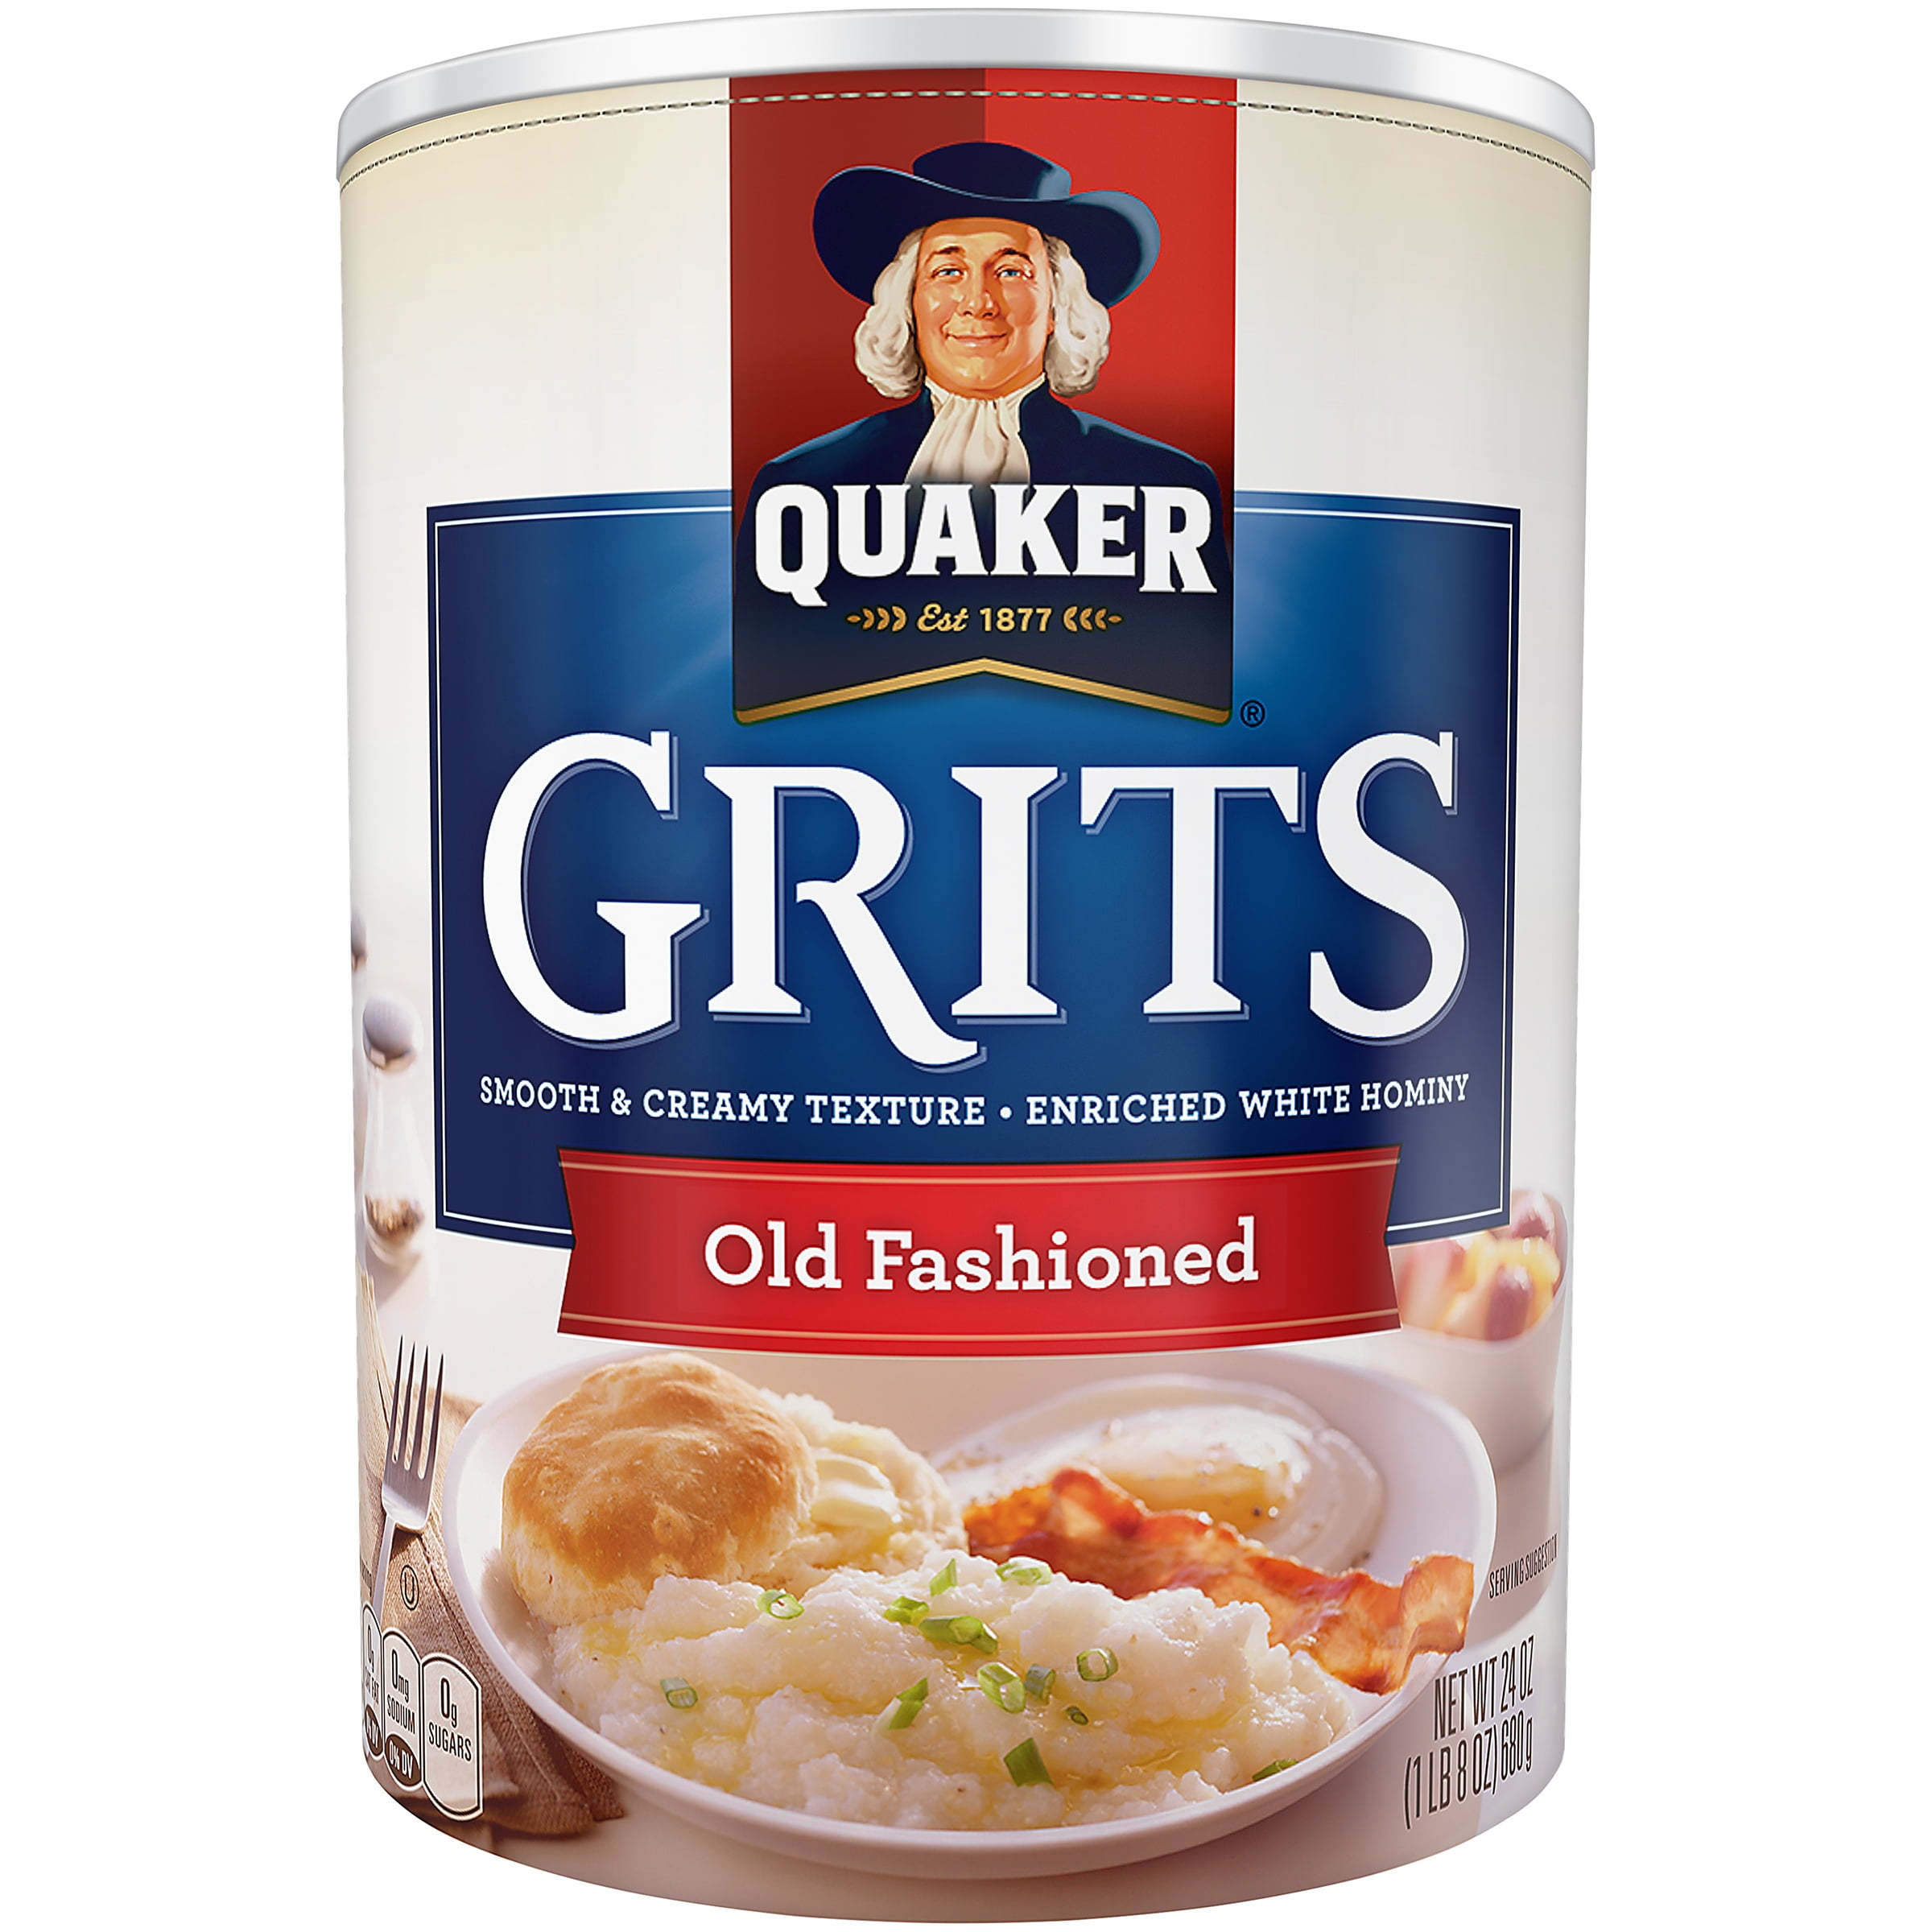 Amazing Quaker Old Fashioned Oats - Perfect Image Reference